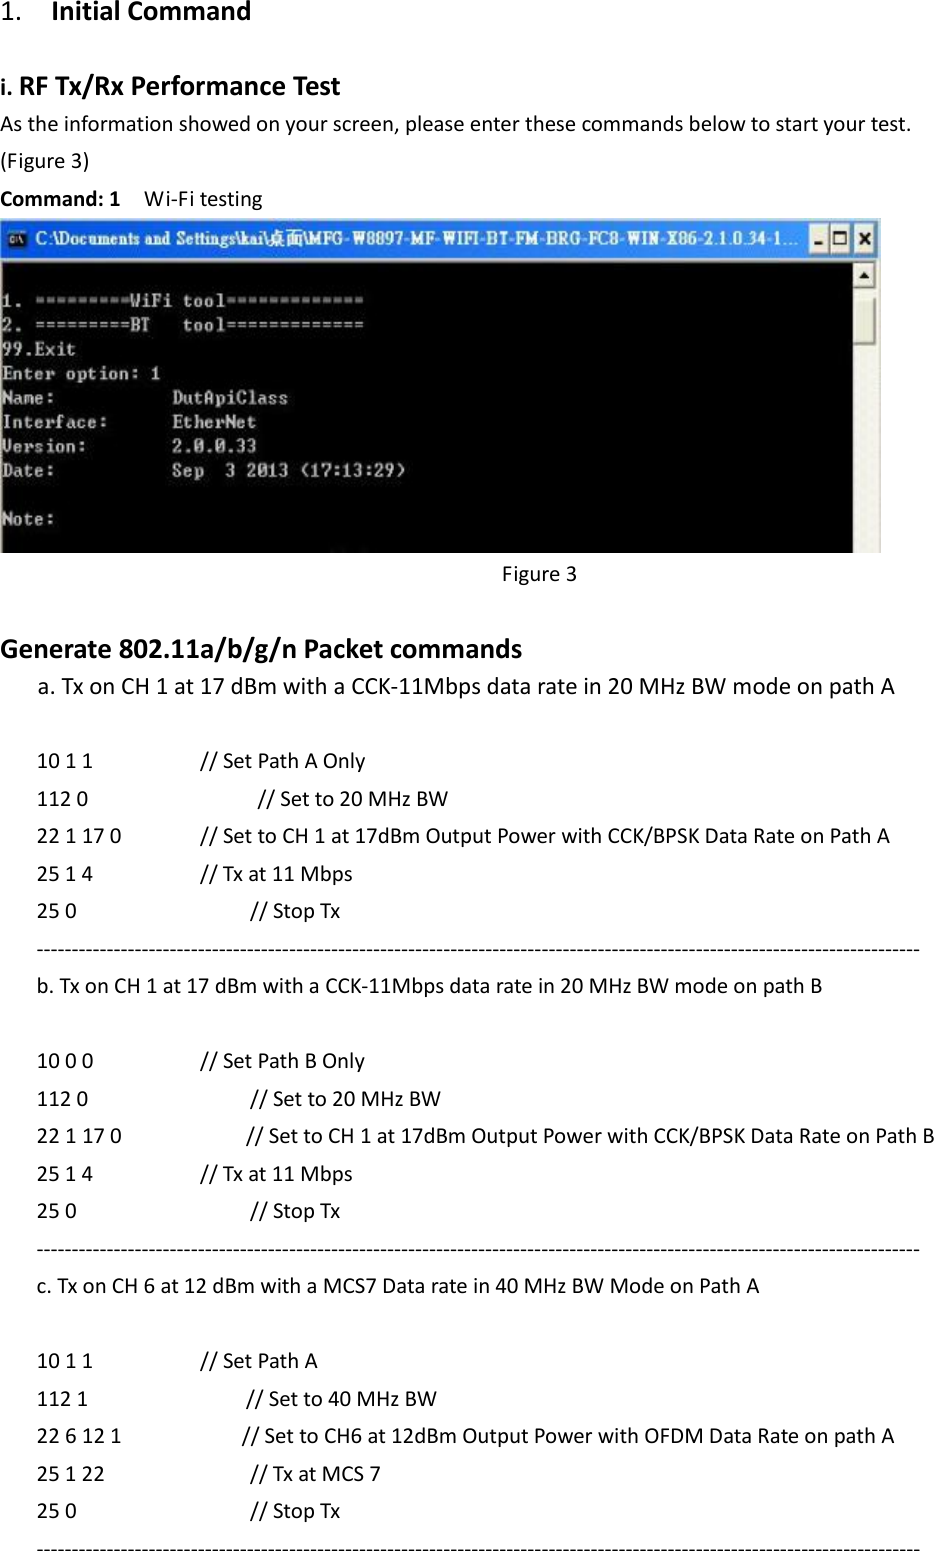 1.    Initial Command  i. RF Tx/Rx Performance Test As the information showed on your screen, please enter these commands below to start your test. (Figure 3) Command: 1    Wi-Fi testing    Figure 3  Generate 802.11a/b/g/n Packet commands a. Tx on CH 1 at 17 dBm with a CCK-11Mbps data rate in 20 MHz BW mode on path A  10 1 1     // Set Path A Only 112 0            // Set to 20 MHz BW 22 1 17 0       // Set to CH 1 at 17dBm Output Power with CCK/BPSK Data Rate on Path A 25 1 4     // Tx at 11 Mbps 25 0        // Stop Tx ------------------------------------------------------------------------------------------------------------------------------ b. Tx on CH 1 at 17 dBm with a CCK-11Mbps data rate in 20 MHz BW mode on path B  10 0 0     // Set Path B Only 112 0           // Set to 20 MHz BW 22 1 17 0        // Set to CH 1 at 17dBm Output Power with CCK/BPSK Data Rate on Path B 25 1 4     // Tx at 11 Mbps 25 0        // Stop Tx ------------------------------------------------------------------------------------------------------------------------------ c. Tx on CH 6 at 12 dBm with a MCS7 Data rate in 40 MHz BW Mode on Path A    10 1 1     // Set Path A 112 1          // Set to 40 MHz BW 22 6 12 1          // Set to CH6 at 12dBm Output Power with OFDM Data Rate on path A   25 1 22      // Tx at MCS 7 25 0        // Stop Tx ------------------------------------------------------------------------------------------------------------------------------ 